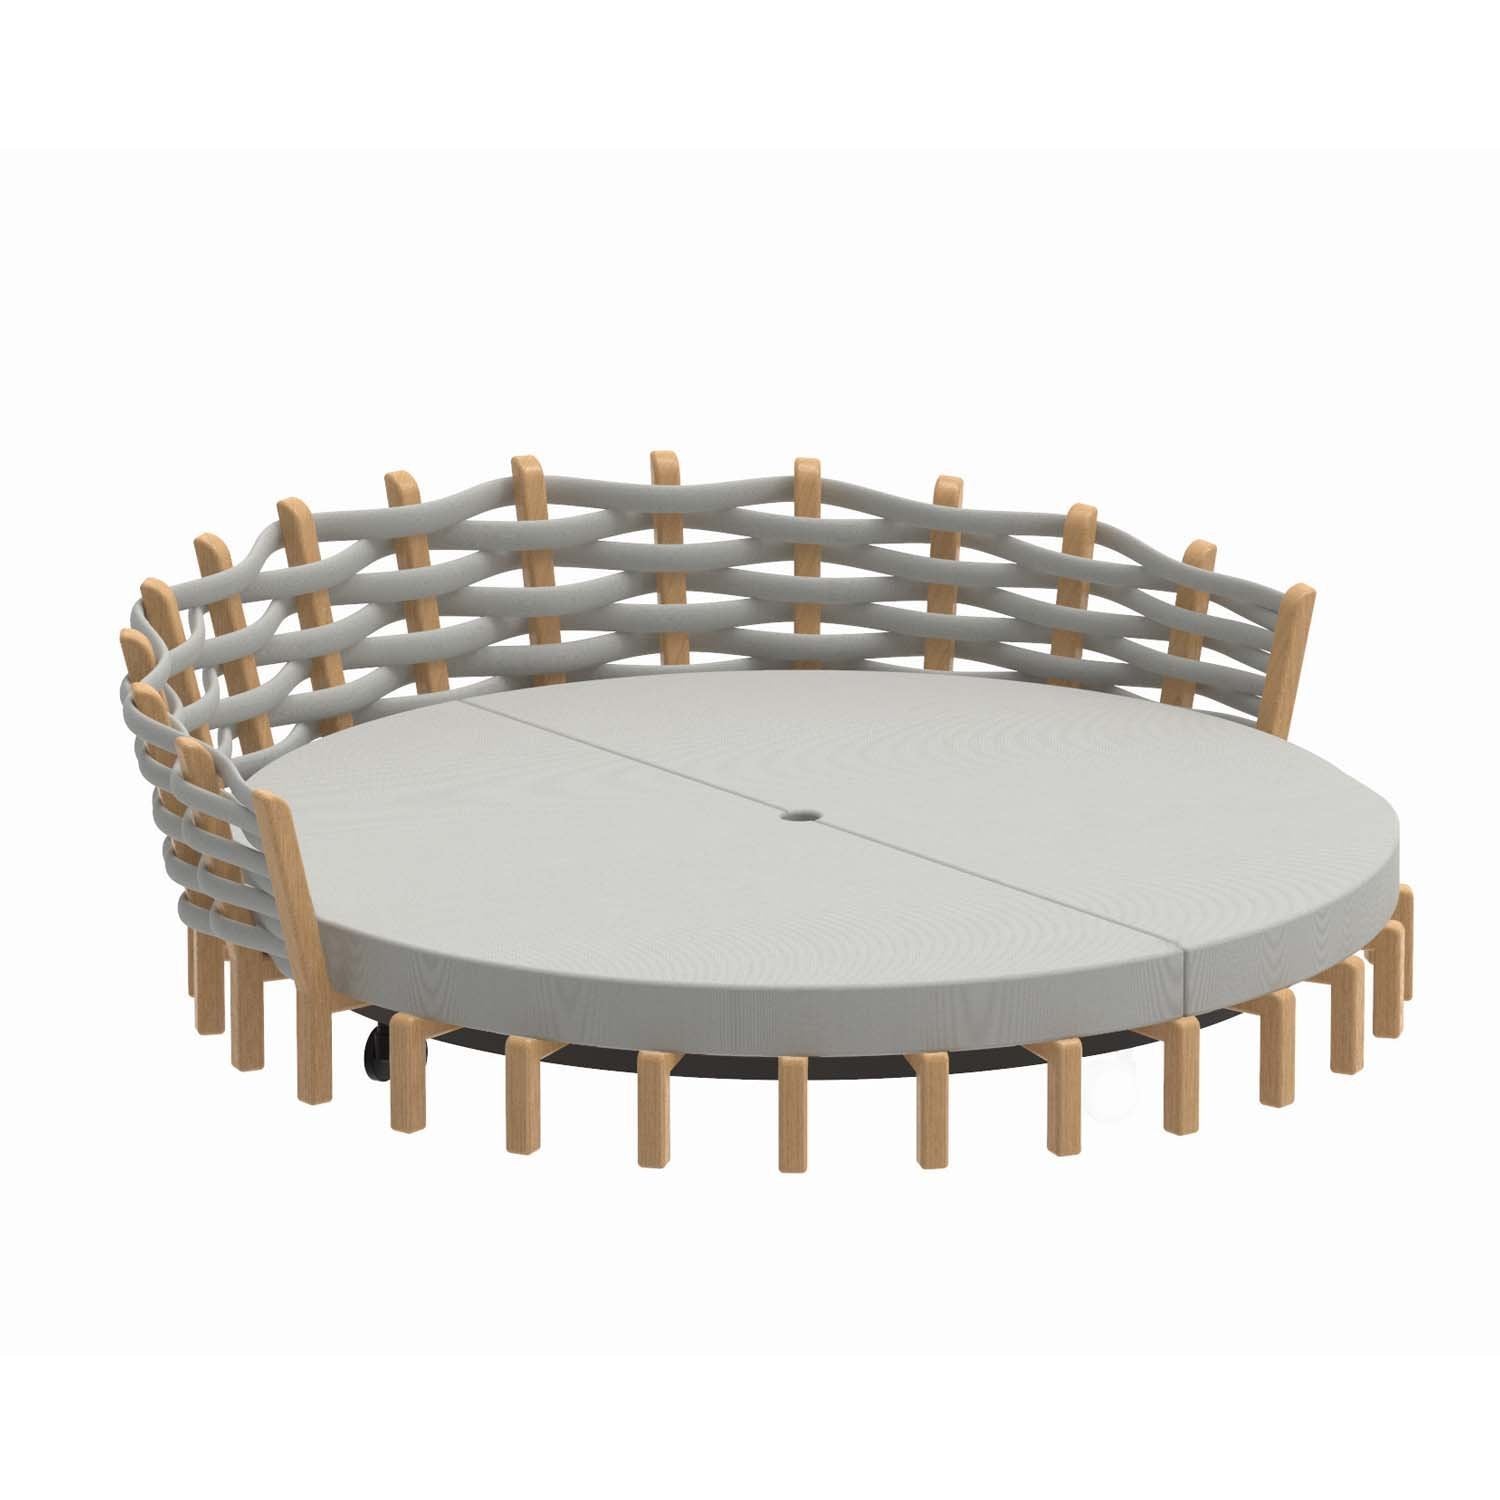 Lotus round daybed